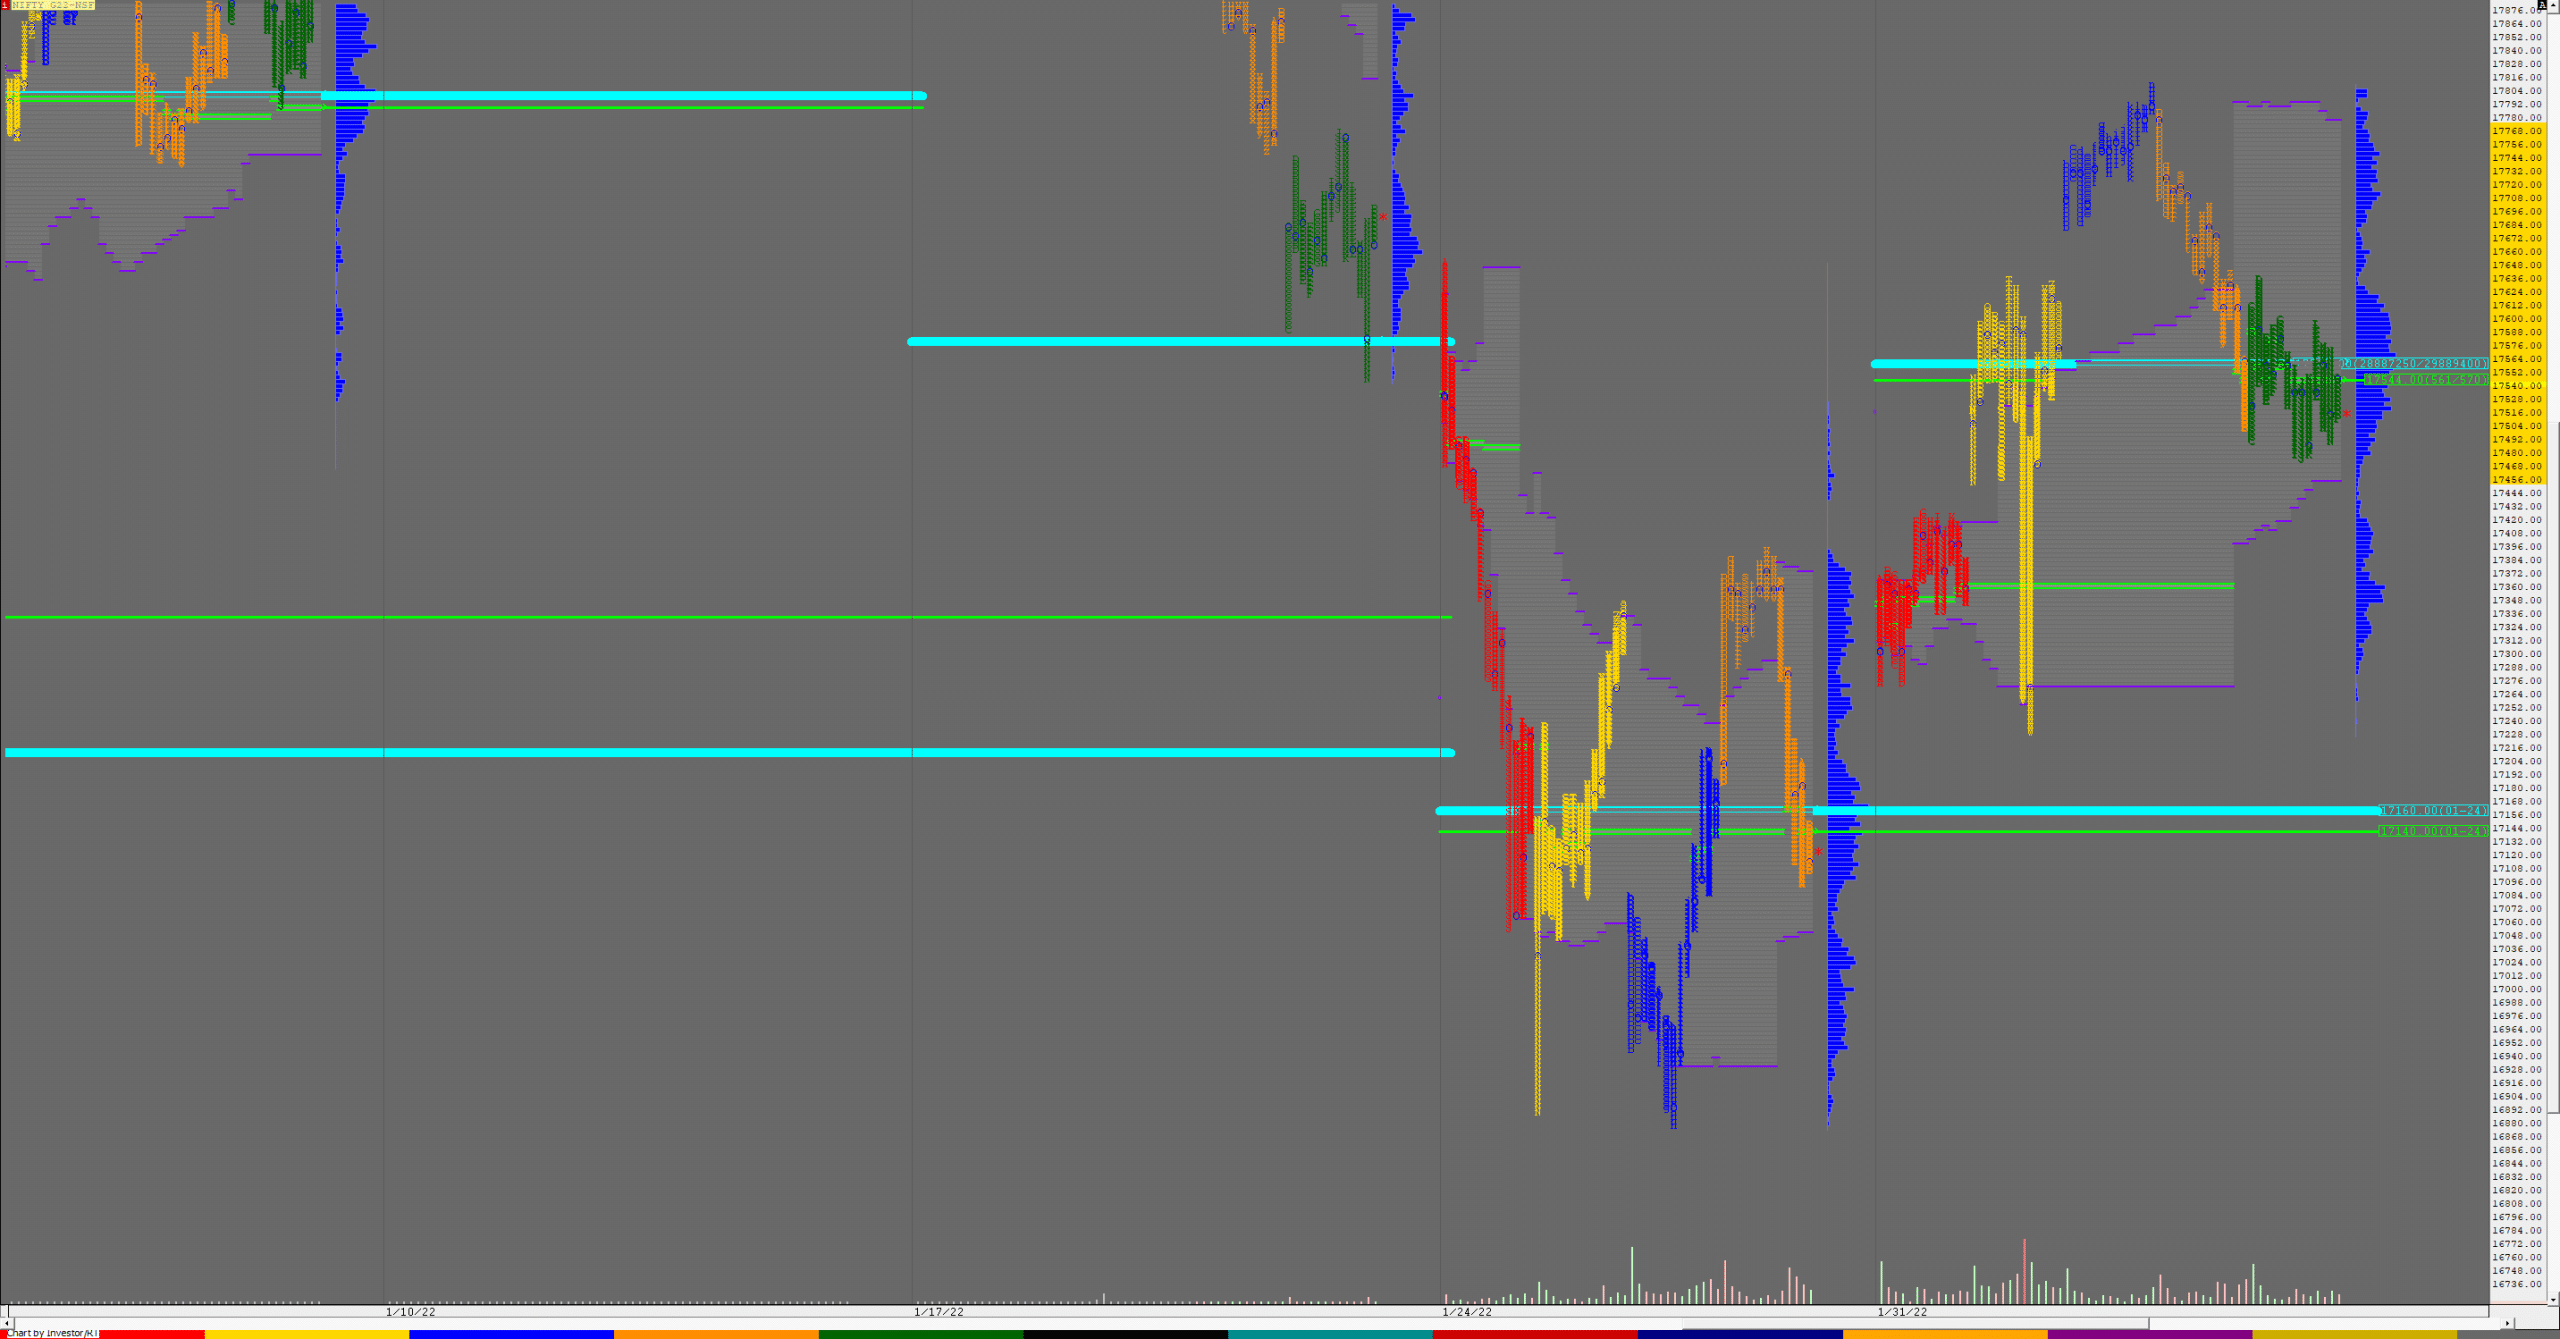 Nf F Weekly Charts (31St Jan To 04Th Feb 2022) And Market Profile Analysis Banknifty Futures, Charts, Day Trading, Intraday Trading, Intraday Trading Strategies, Market Profile, Market Profile Trading Strategies, Nifty Futures, Order Flow Analysis, Support And Resistance, Technical Analysis, Trading Strategies, Volume Profile Trading